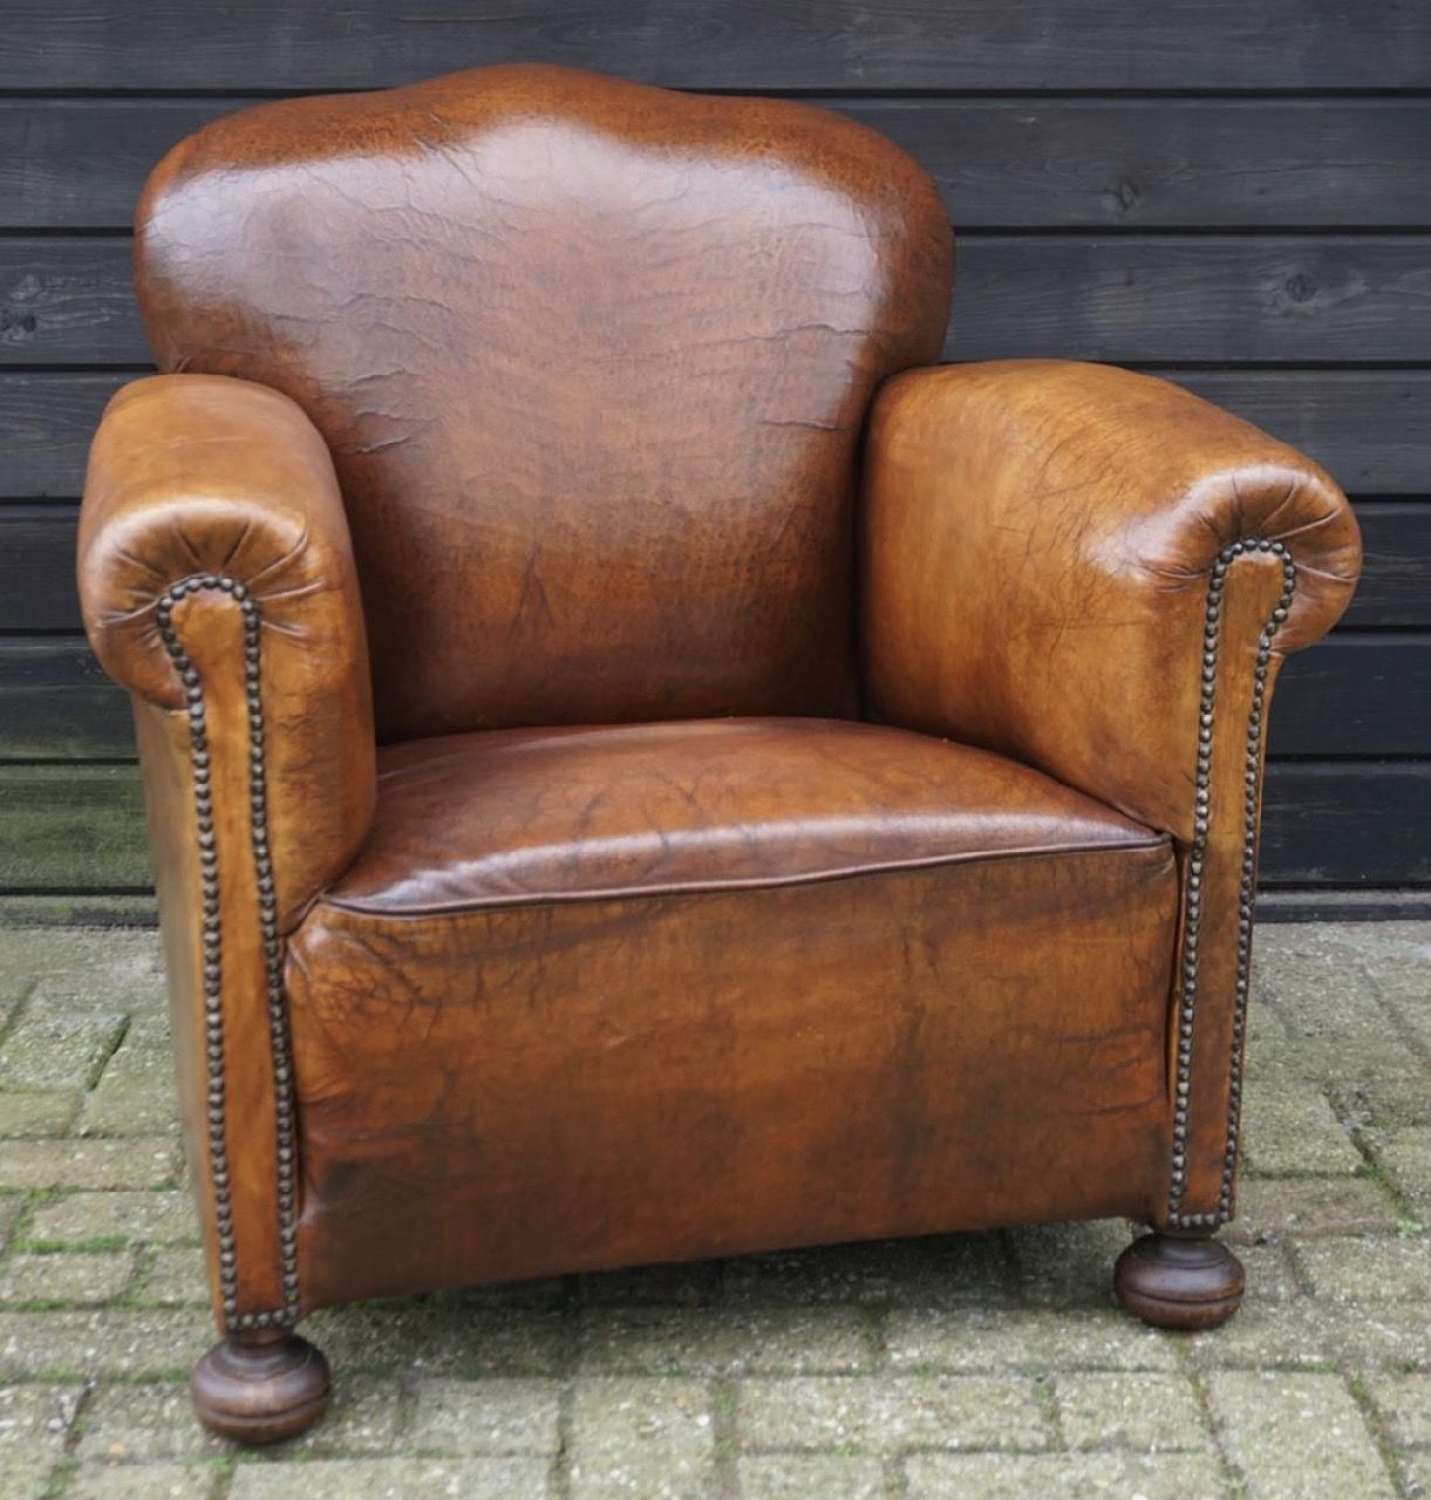 ANTIQUE BROWN LEATHER ARMCHAIR